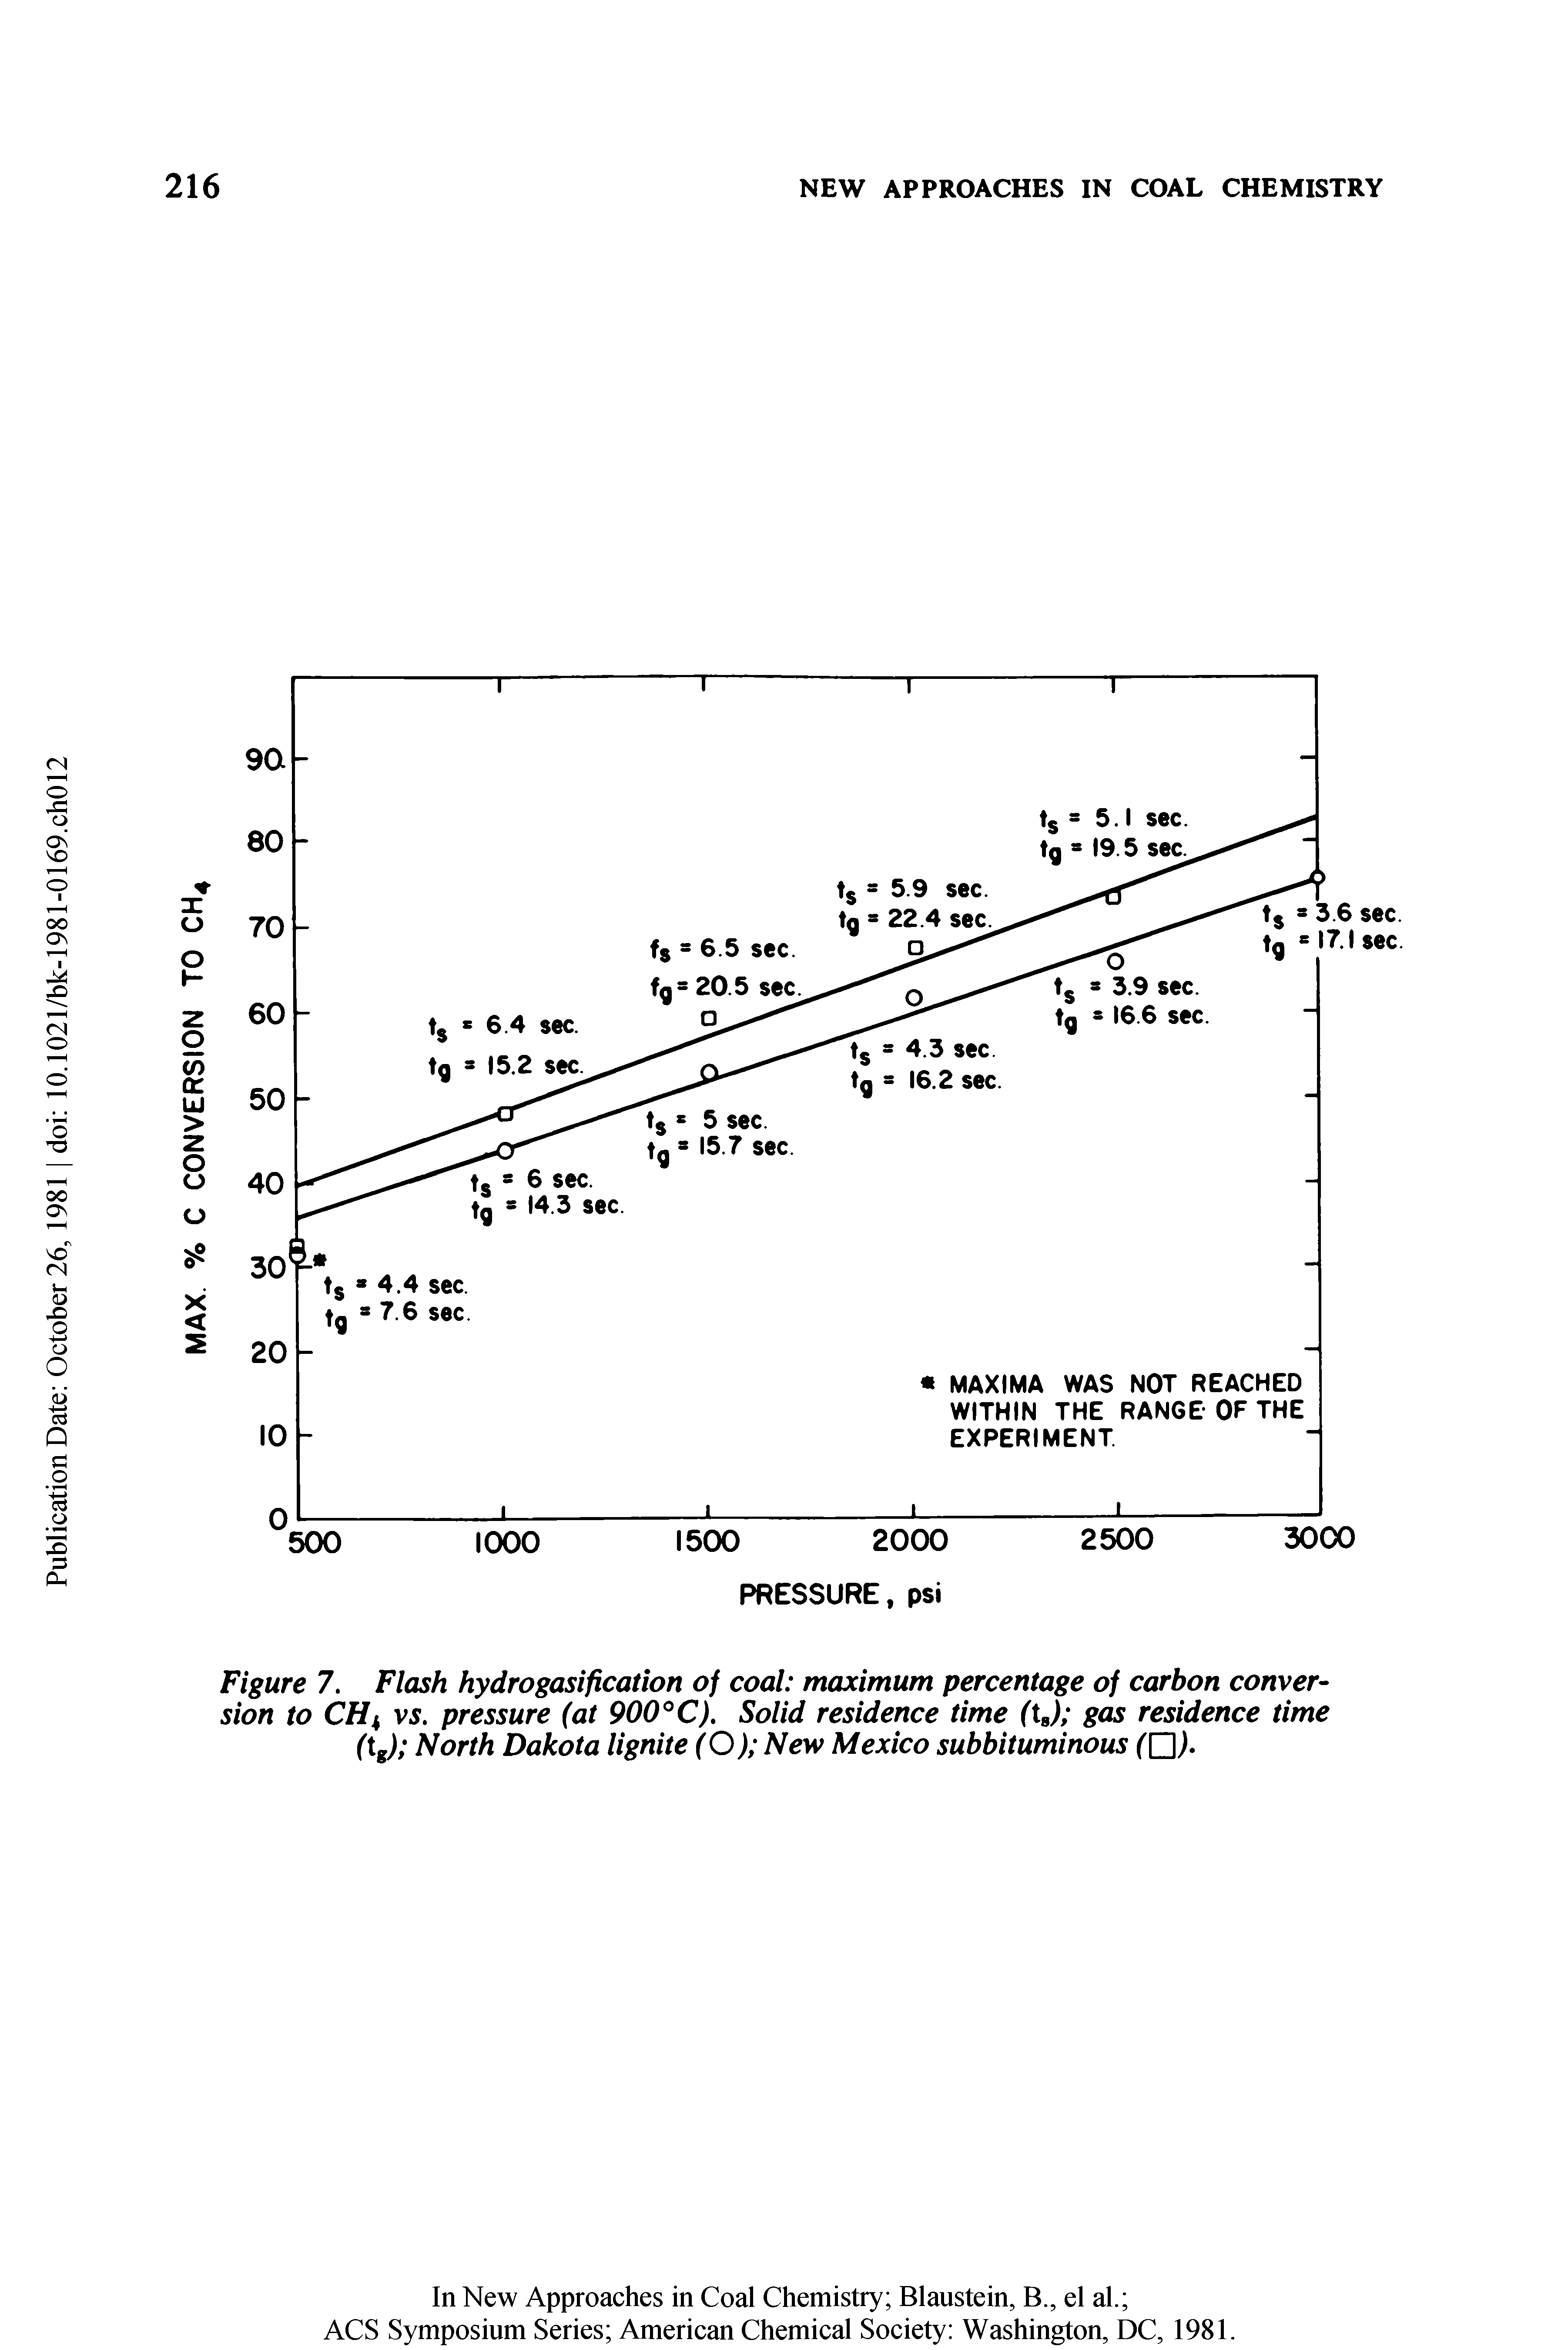 Figure 7. Flash hydrogasification of coal maximum percentage of carbon conversion to CHk vs. pressure (at 900°C). Solid residence time (ts) gas residence time (tg) North Dakota lignite (O) New Mexico subbituminous (O).